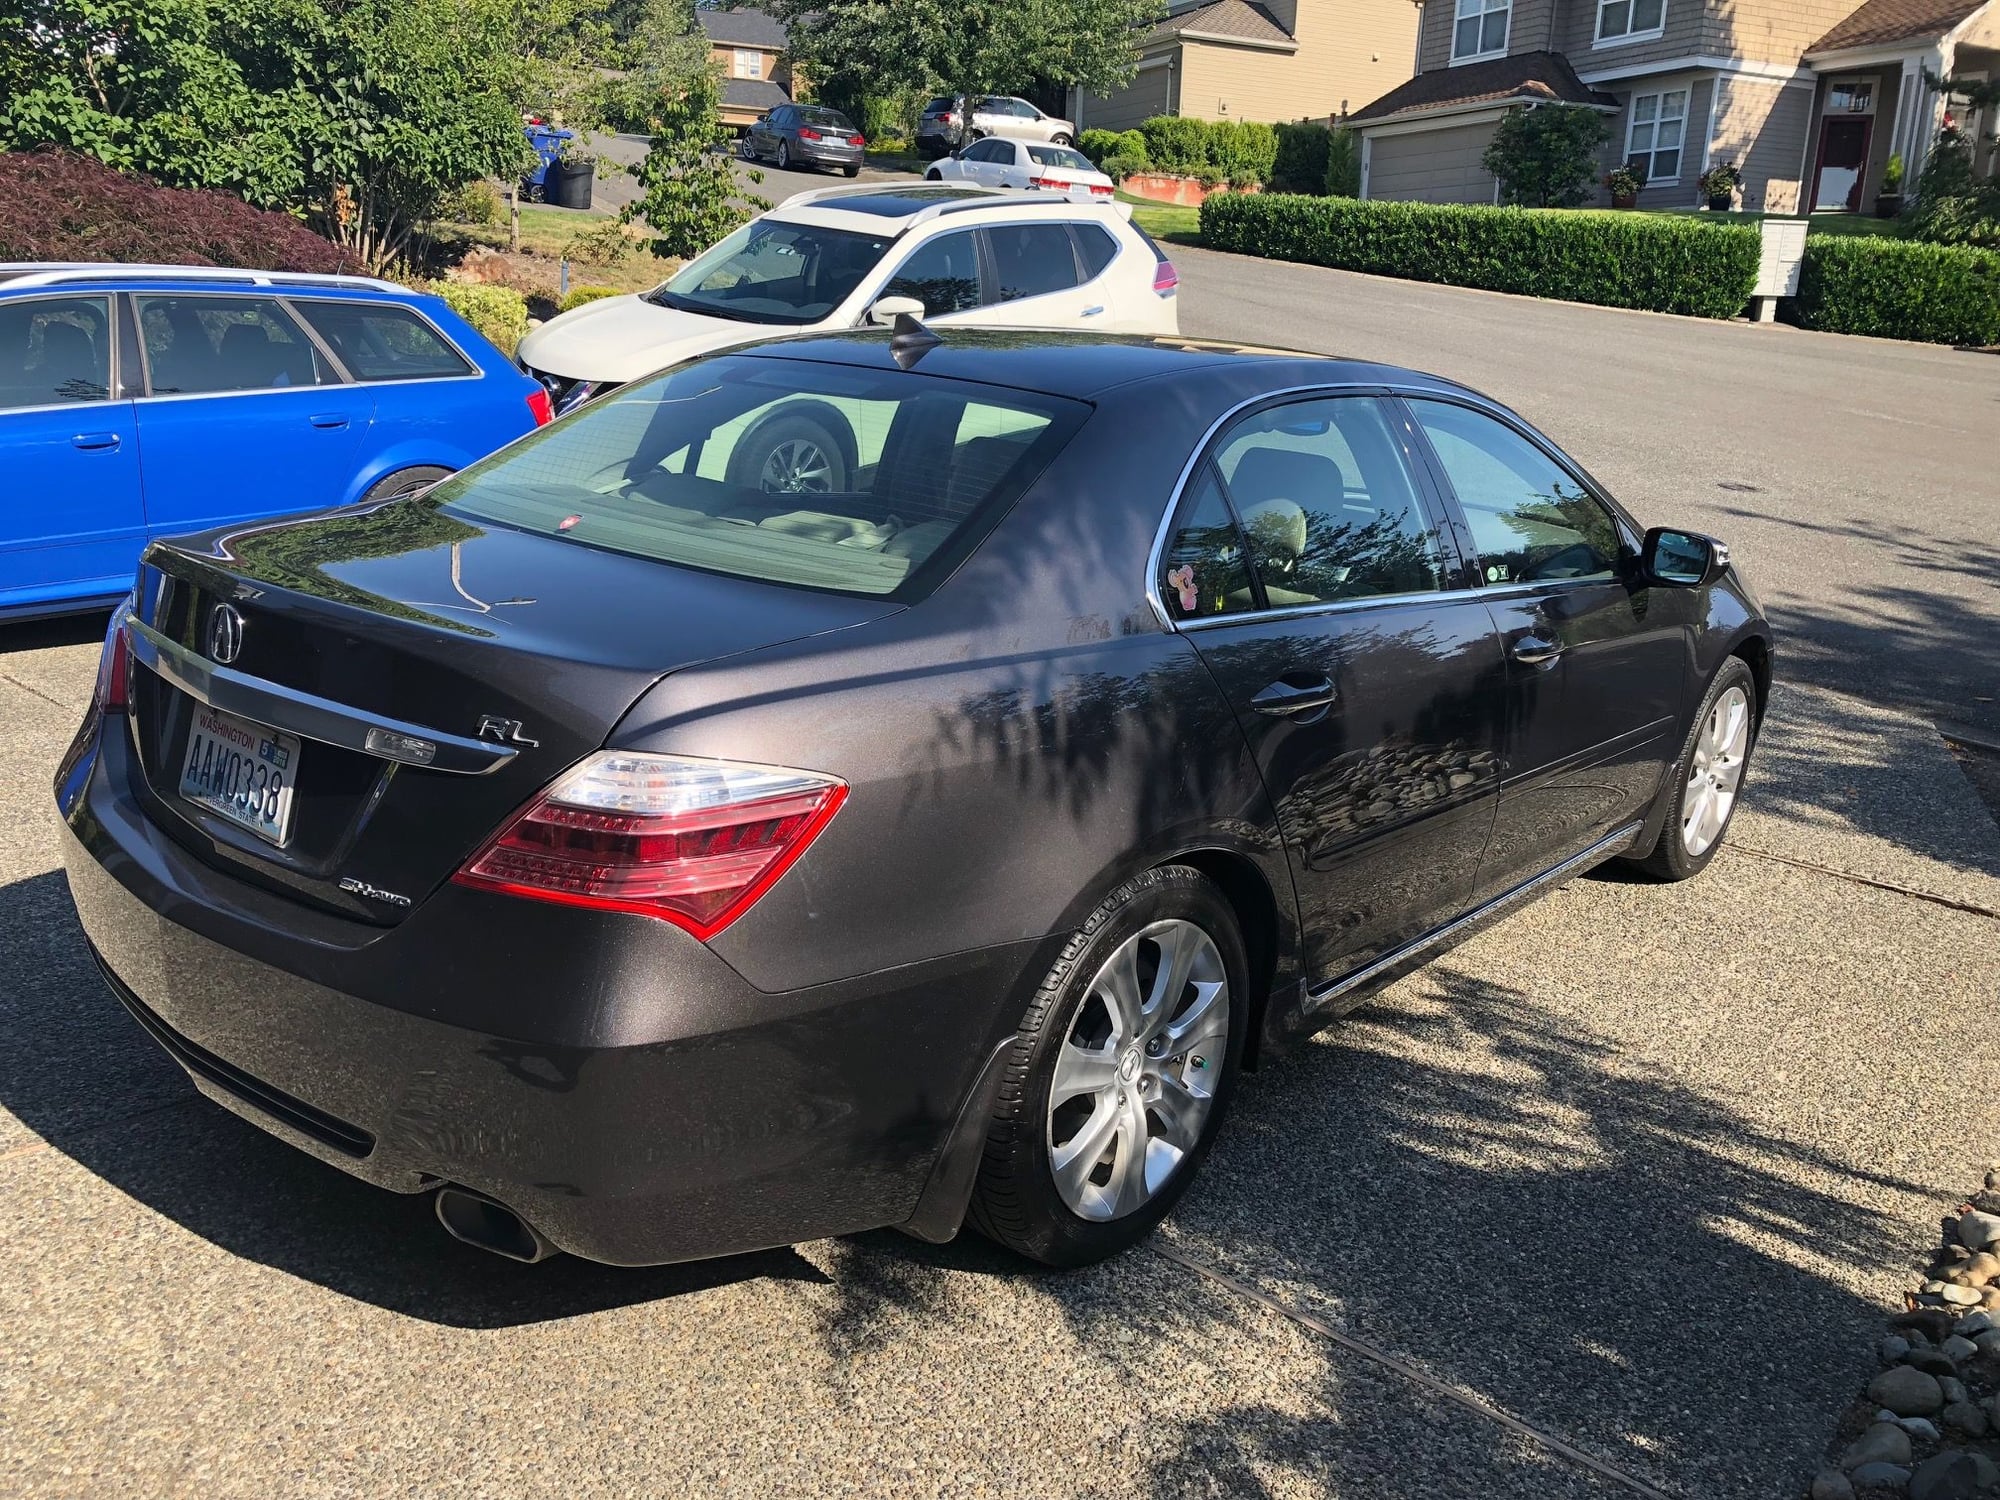 2010 Acura RL - FS: Clean 2010 Acura RL technology and low Miles - Used - VIN JH4KB2F64AC001855 - 66,000 Miles - 6 cyl - 4WD - Automatic - Sedan - Gray - Issaquah, WA 98029, United States